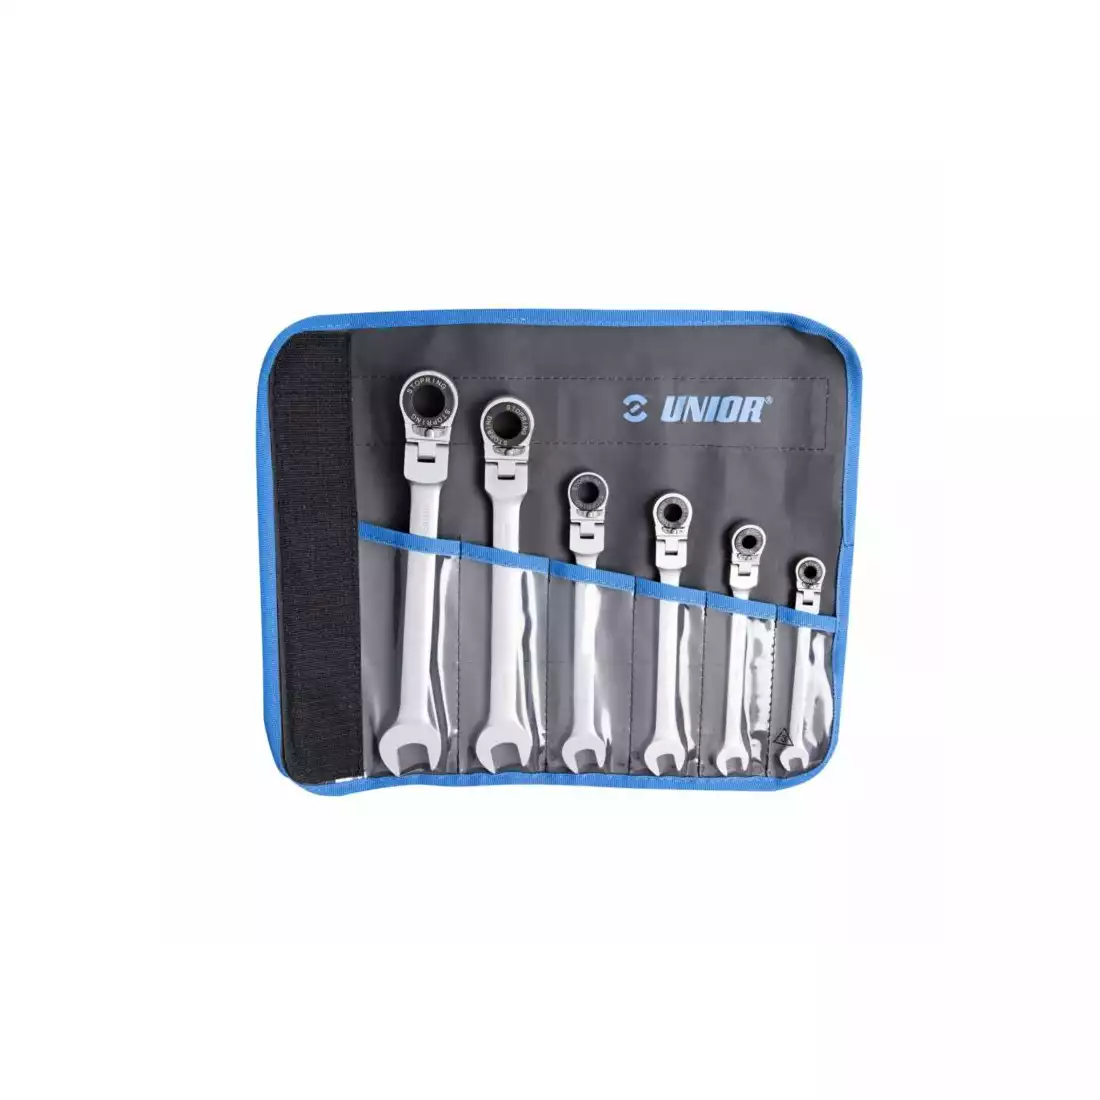 UNIOR set of combination wrenches with ratchet 8-19